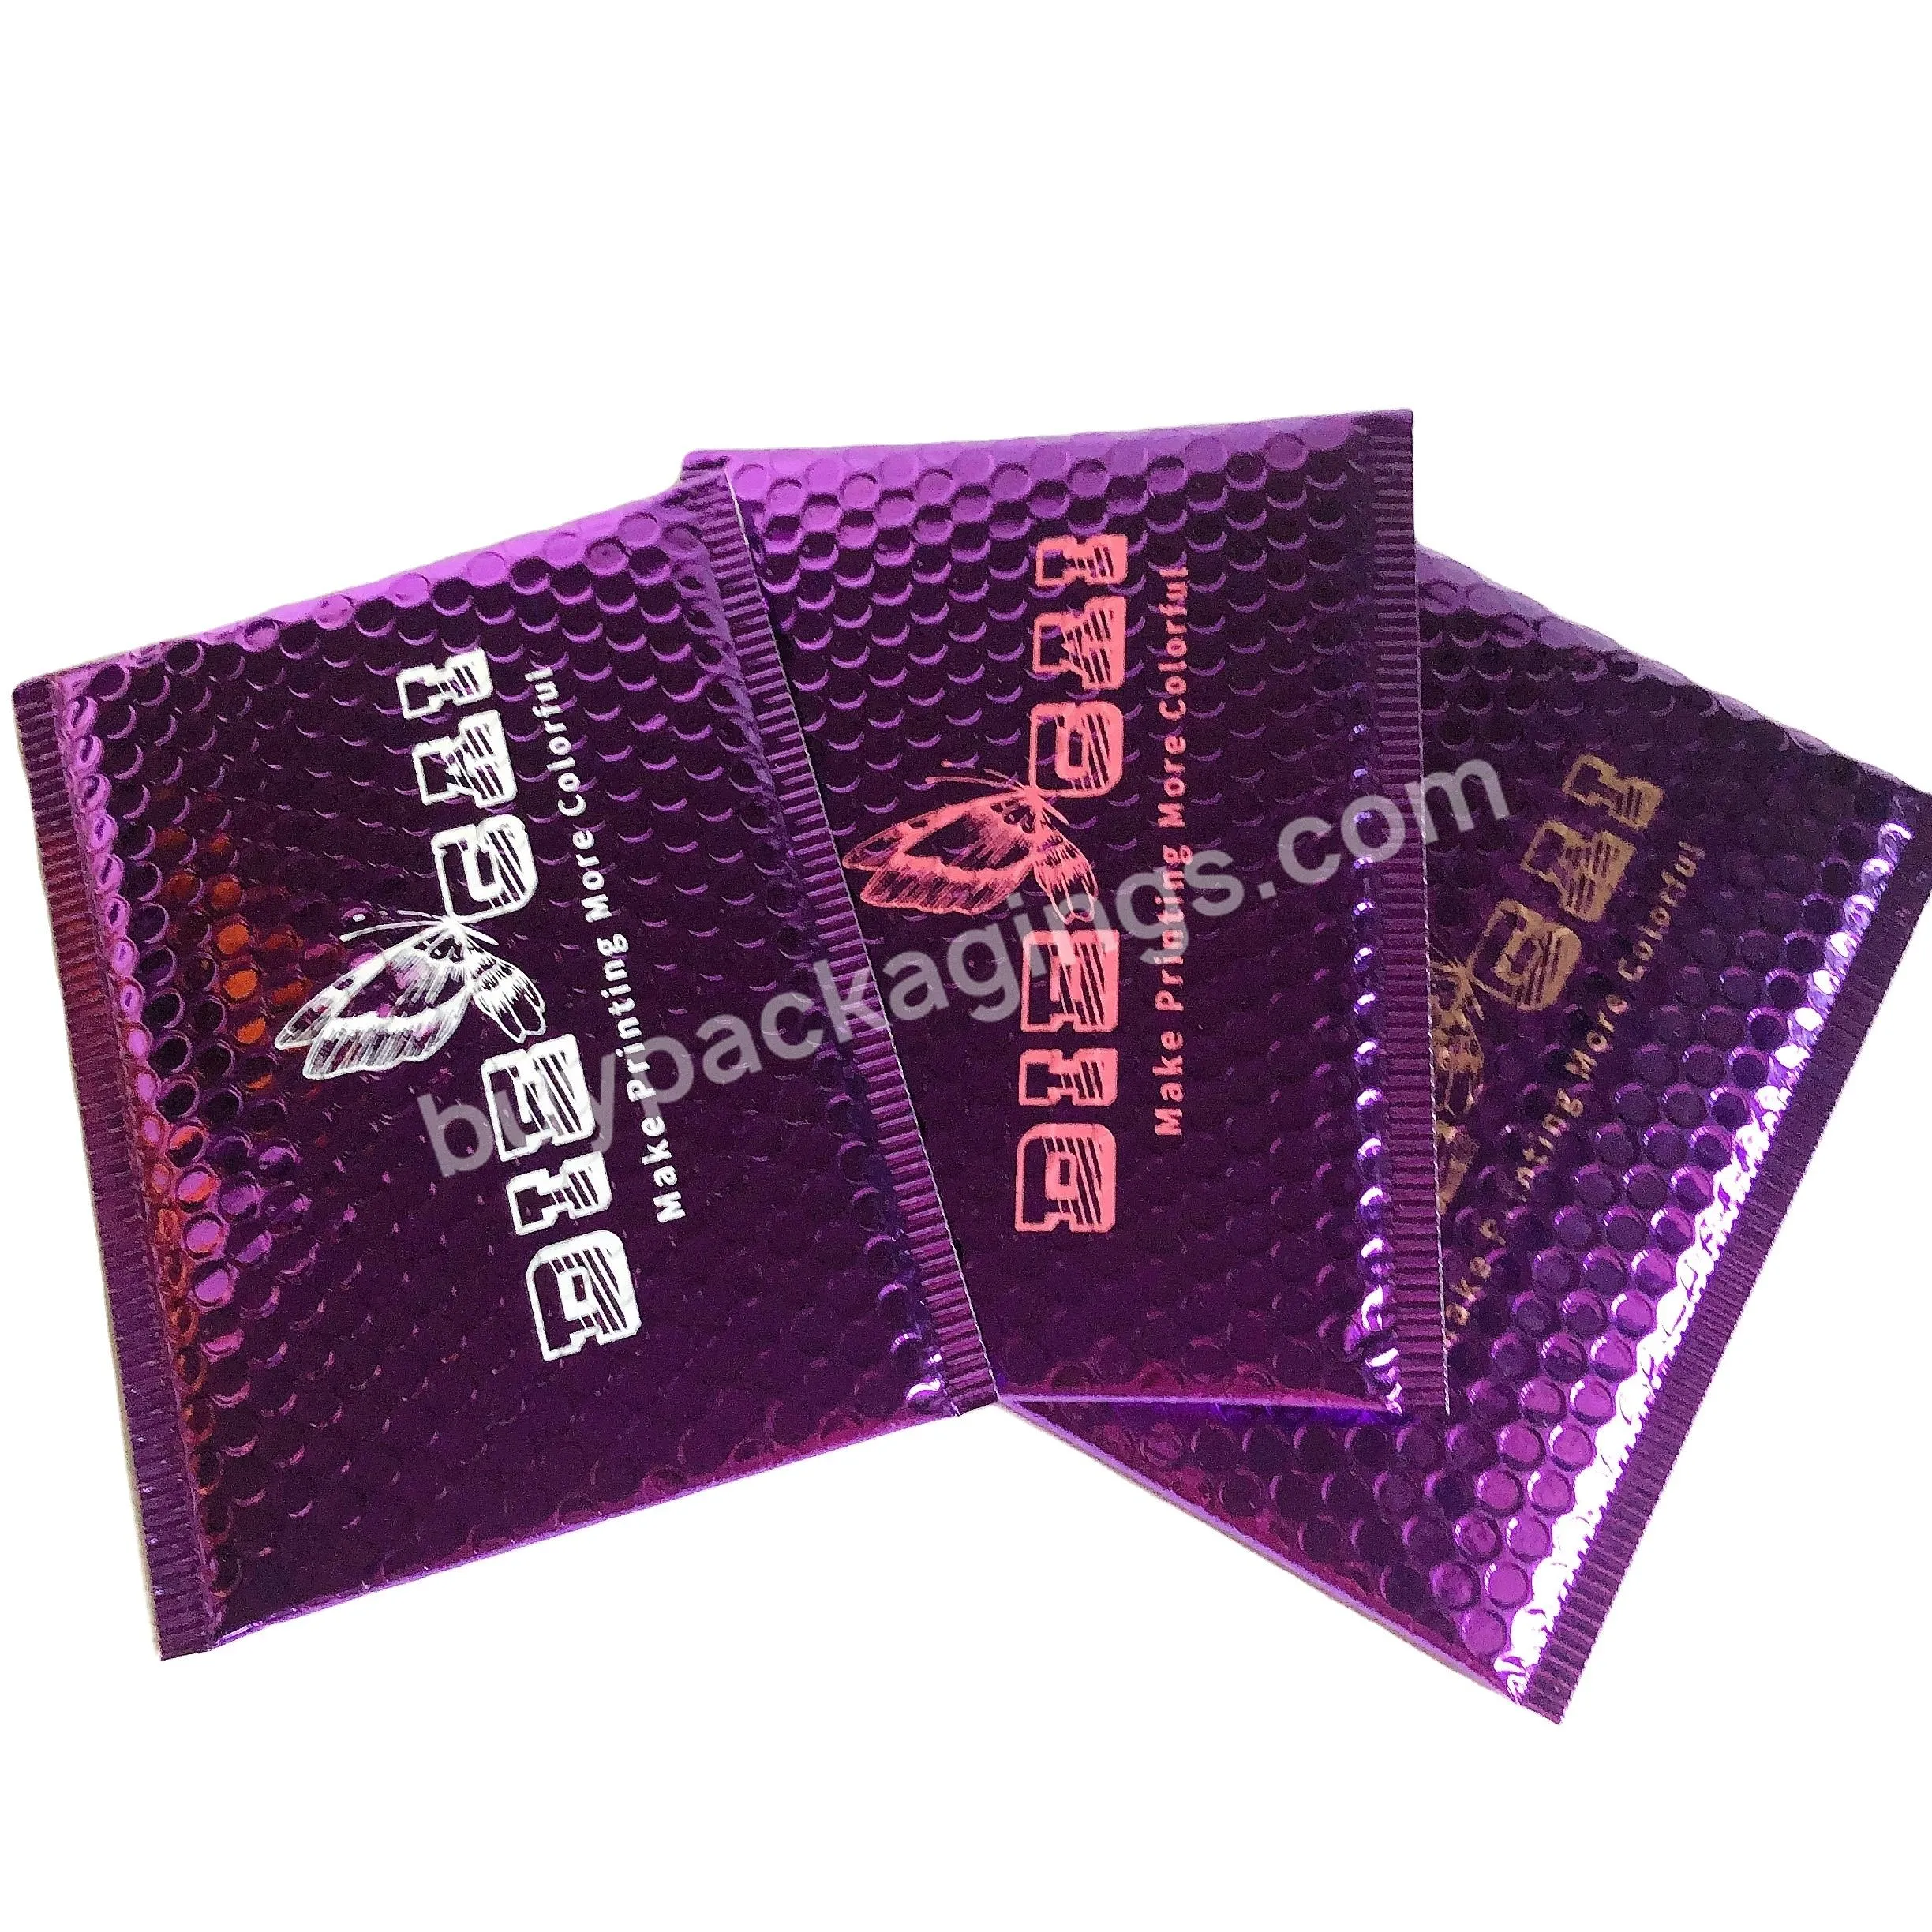 Custom Metallic Bubble Packaging Purple Bubble Mailers Padded Envelopes Self Adhesive Courier Bags - Buy Purple Bubble Mailers,Metallic Bubble Packaging,Padded Envelopes Self Adhesive.